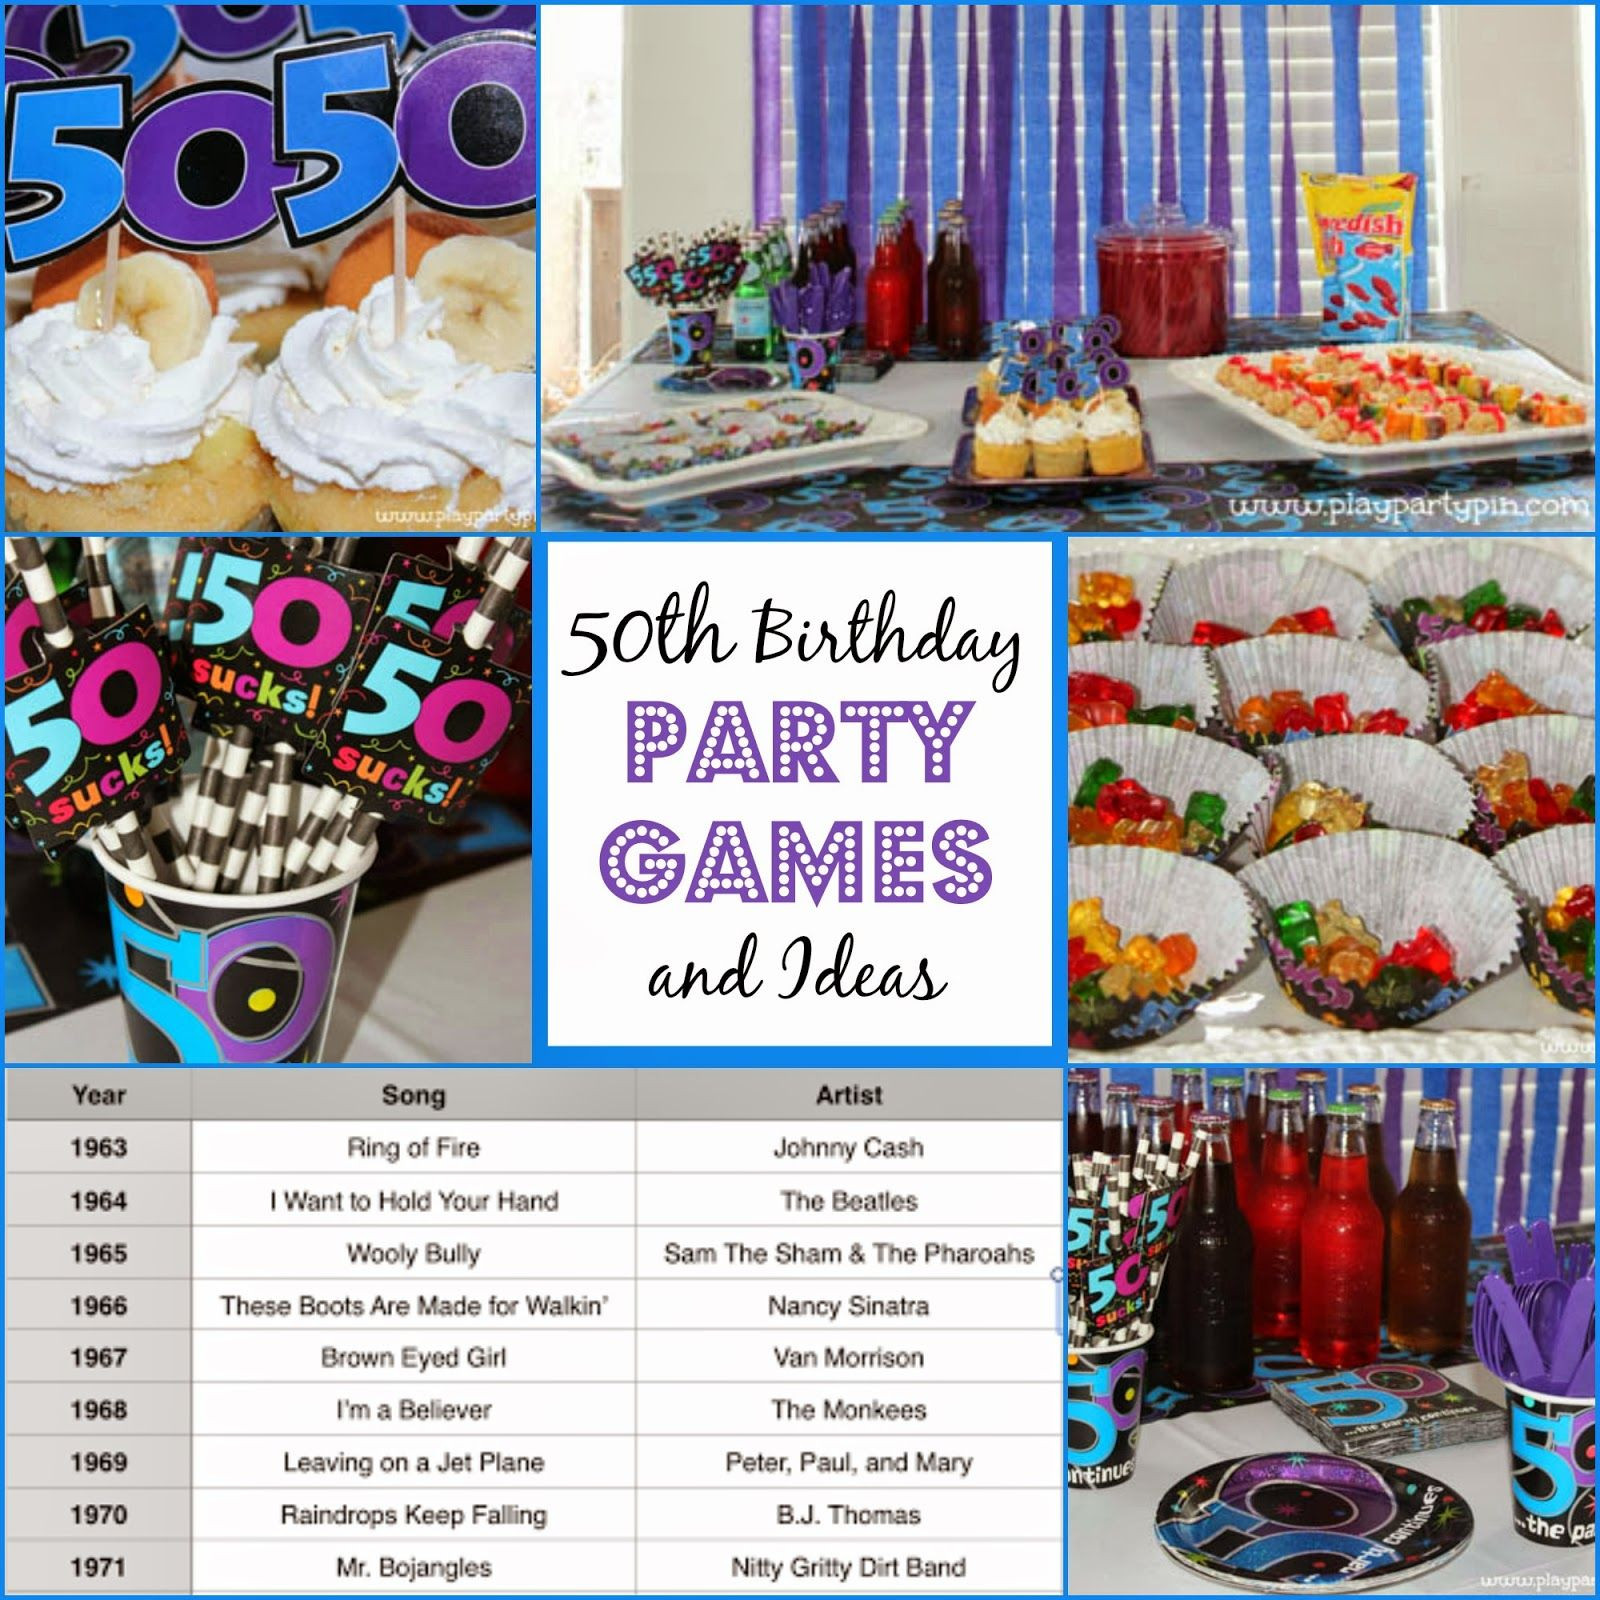 Food Ideas For 50Th Birthday Party
 The Best 50th Birthday Party Ideas Games Decorations